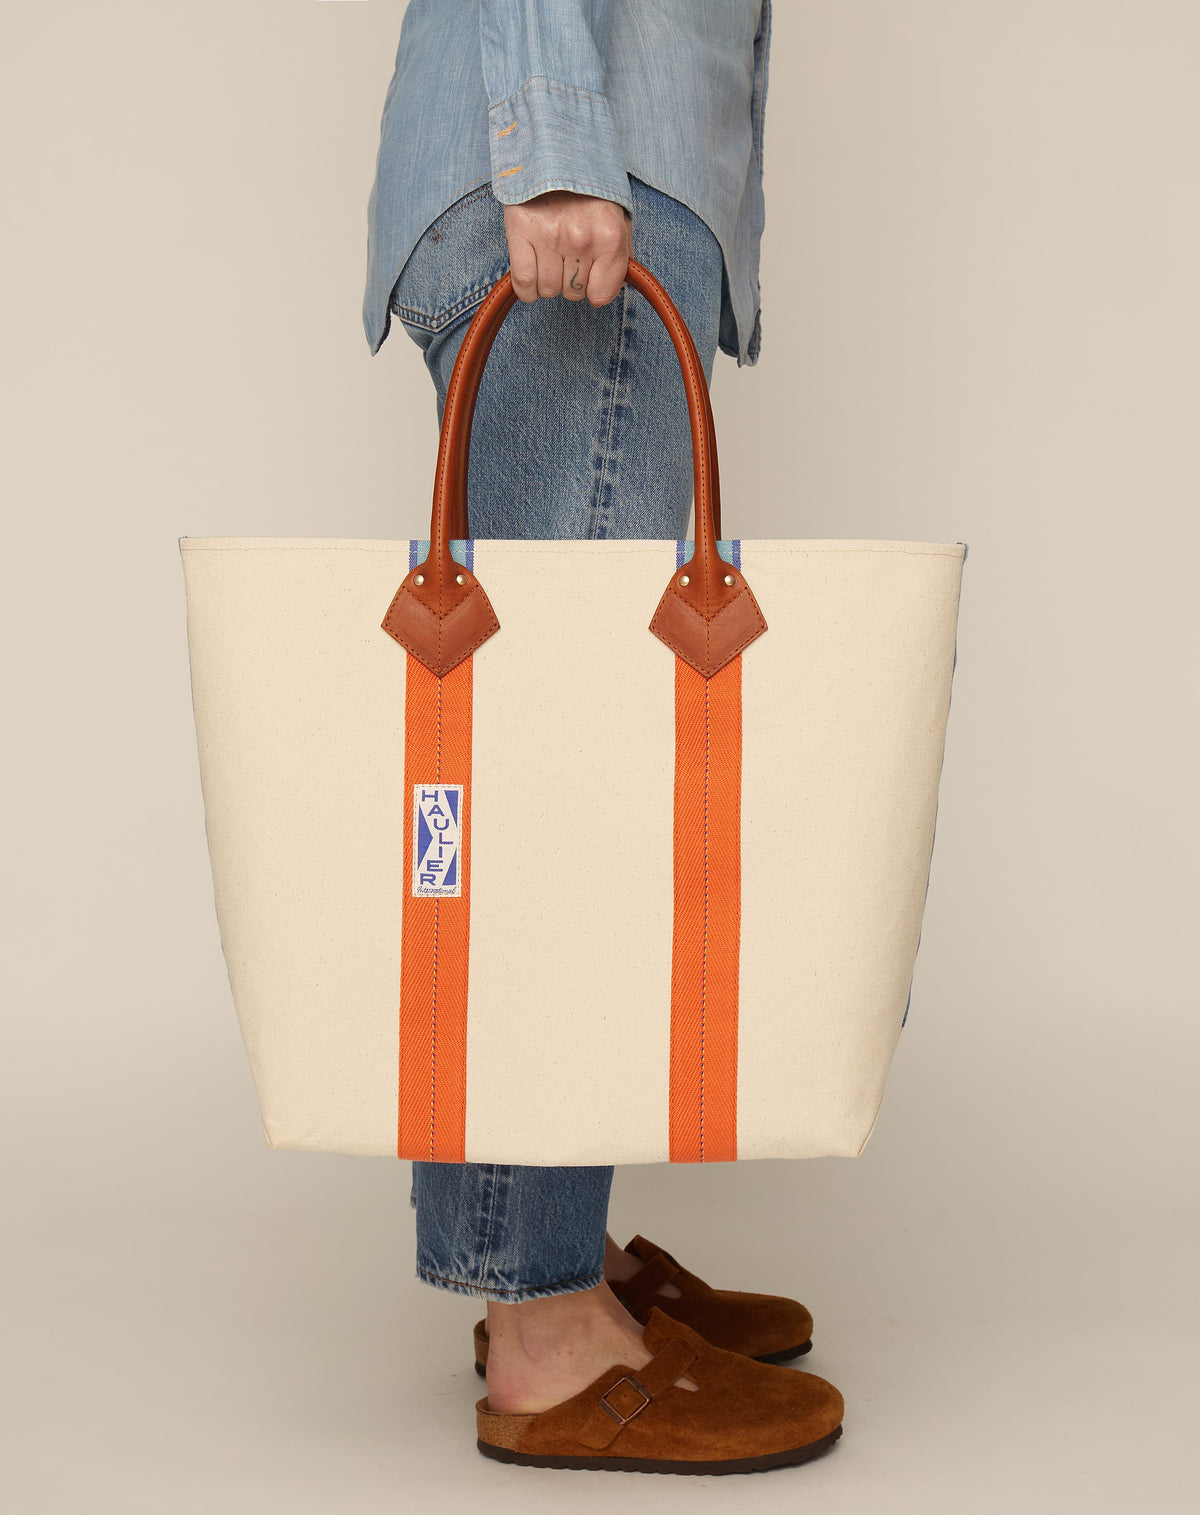 Image of person in blue jeans holding a medium-sized classic canvas tote bag in natural ecru colour with tan leather handles and contrasting stripes.